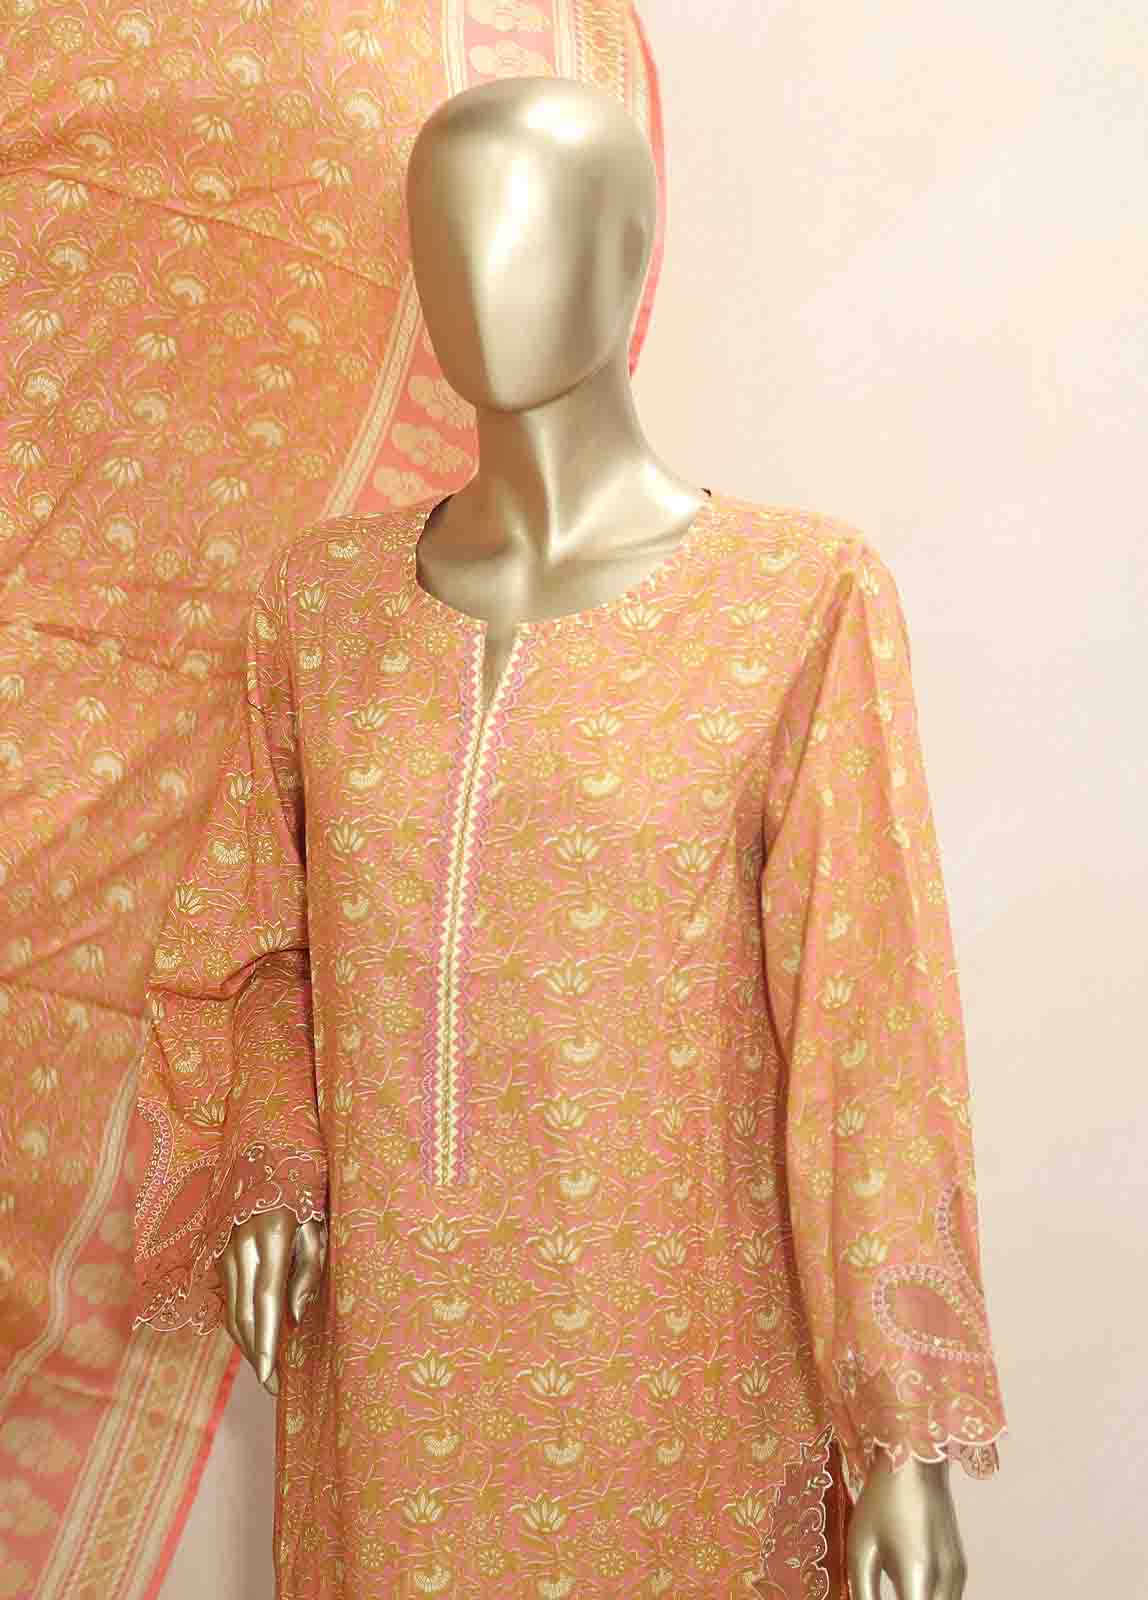 SMLF-135-Emb- 3 Piece Embroidered Stitched Suit